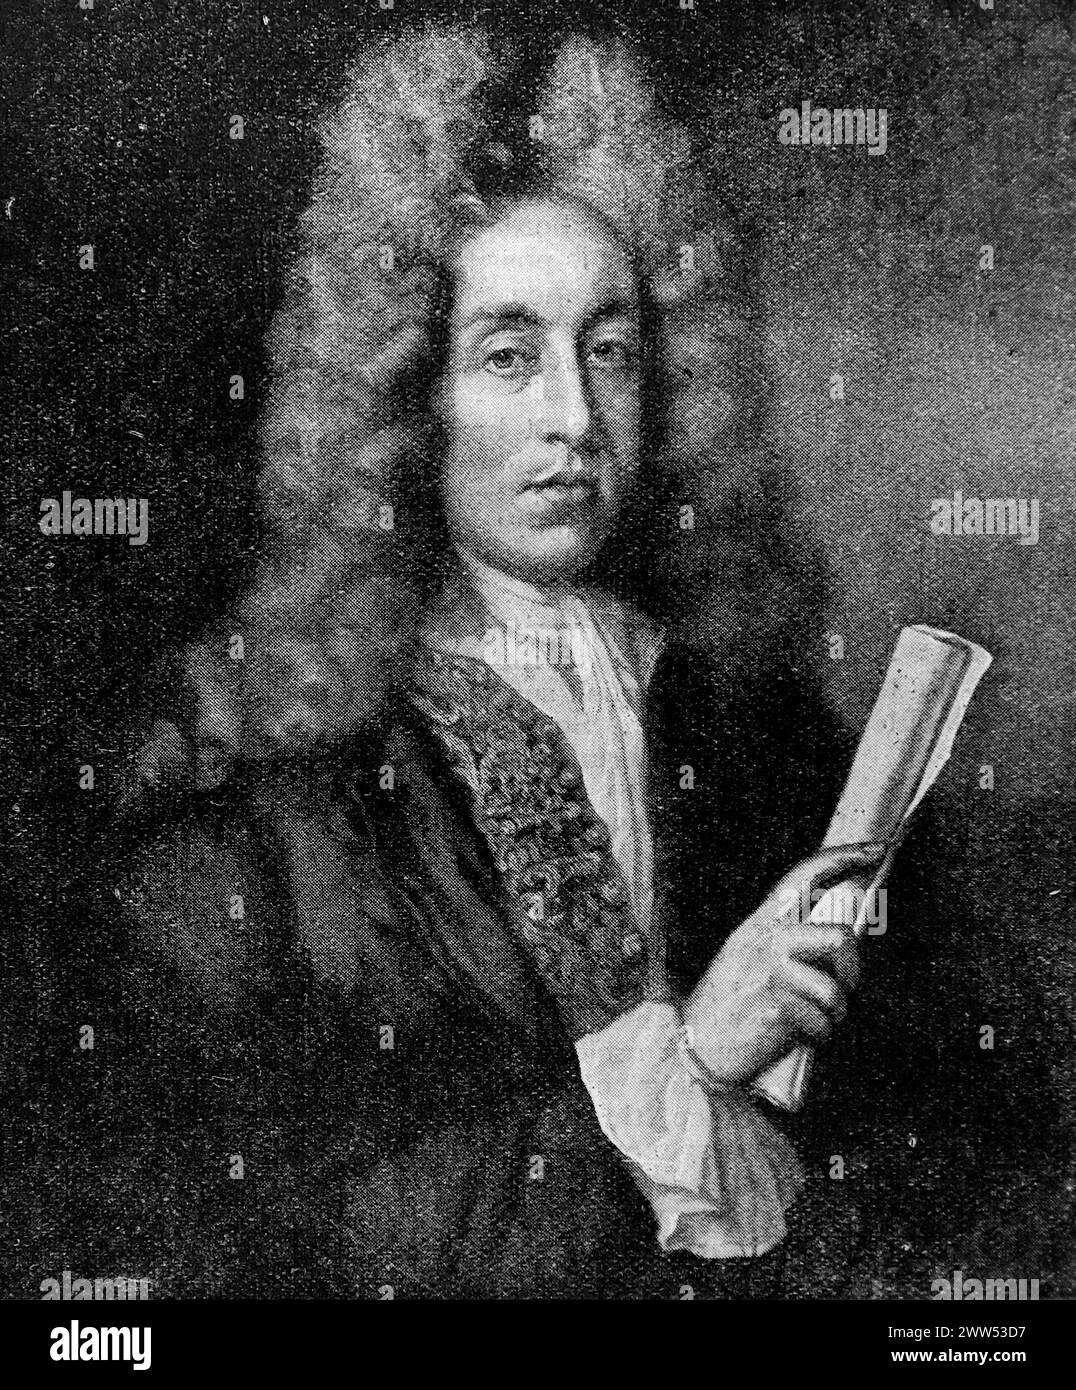 Portrait of Henry Purcell, pioneer of English opera, from an unattributed painting. Black and white. Photograph taken from a magazine originally published in 1898. Stock Photo